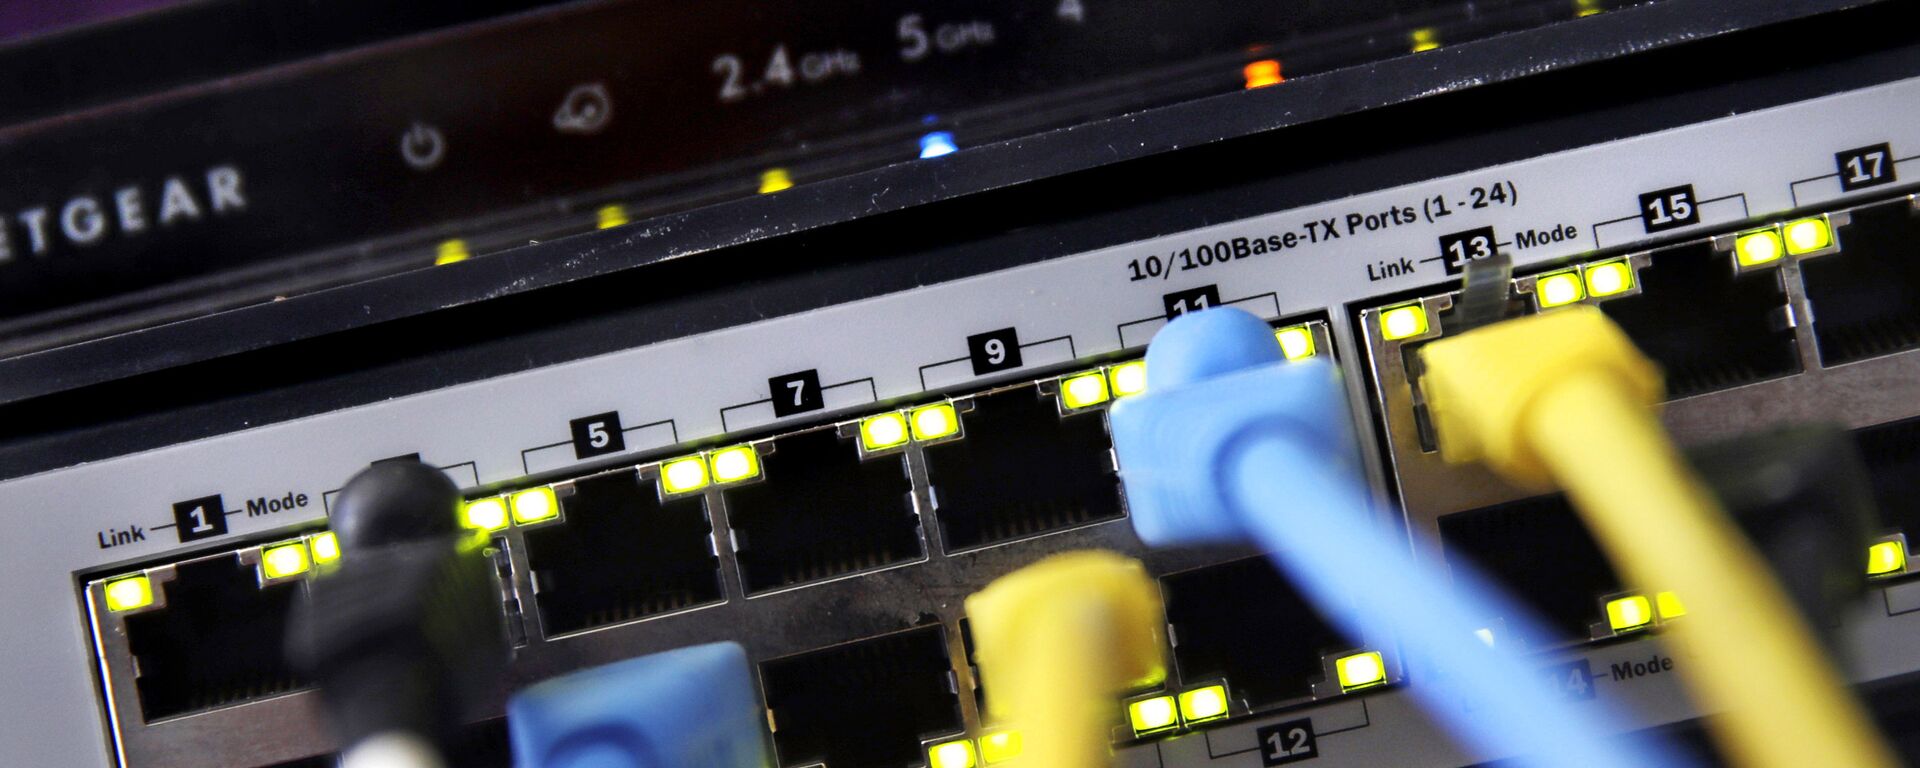 In this June 19, 2018, file photo a router and internet switch are displayed in East Derry, N.H. Net neutrality traces back to an engineering maxim called the “end-to-end principle,” a self-regulating network that put control in the hands of end users rather than a central authority - Sputnik International, 1920, 28.02.2023